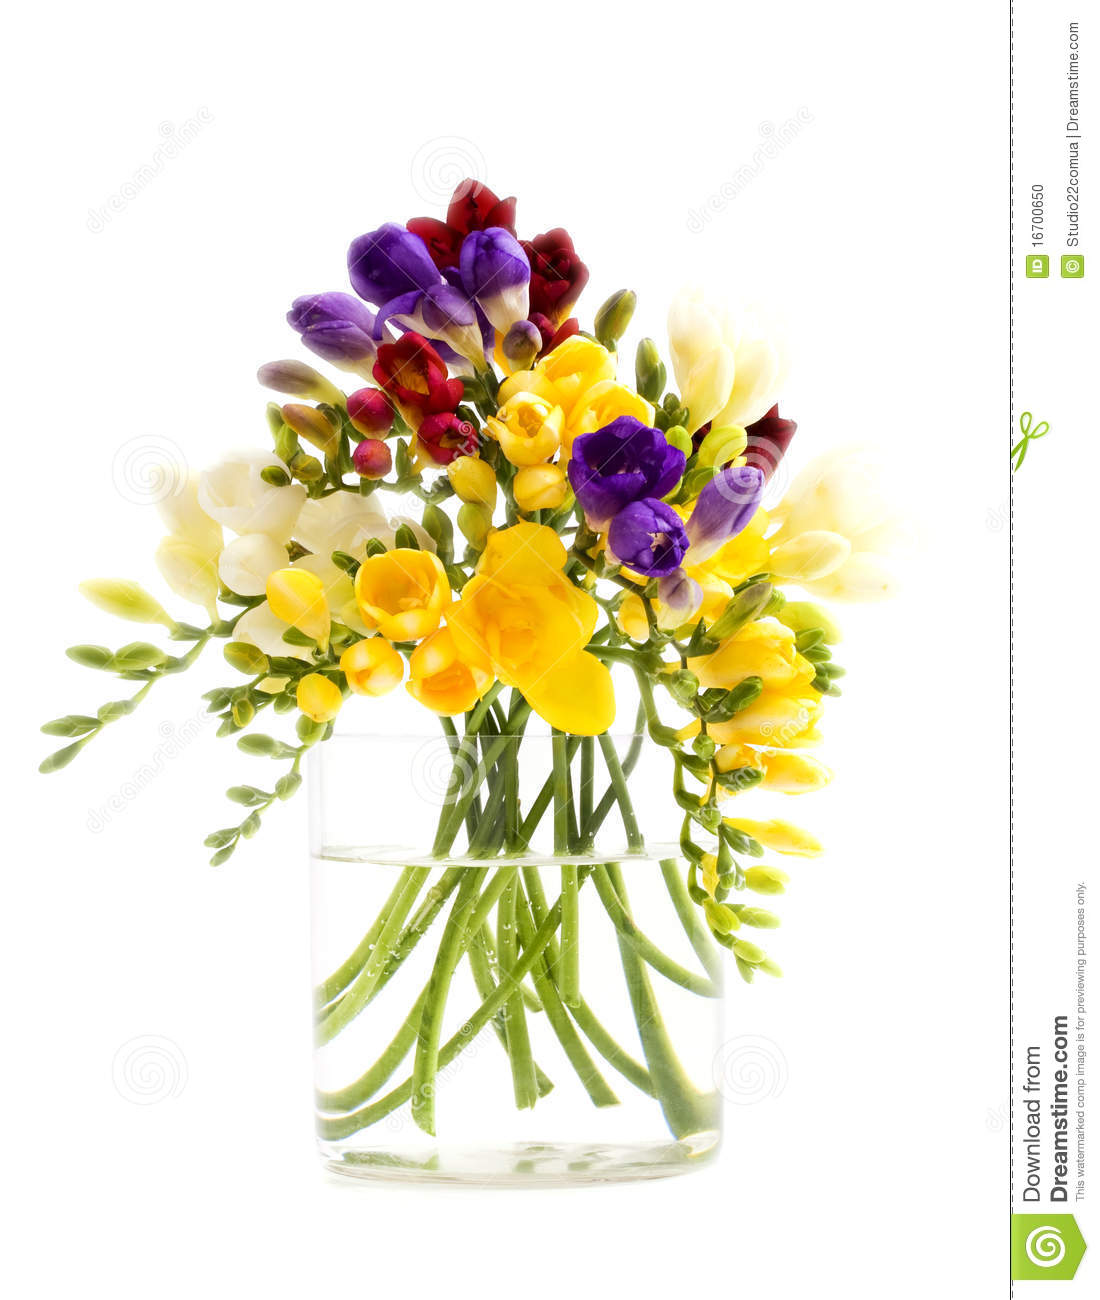 Freesia Flowers Bunch In A Vase Isolated On White